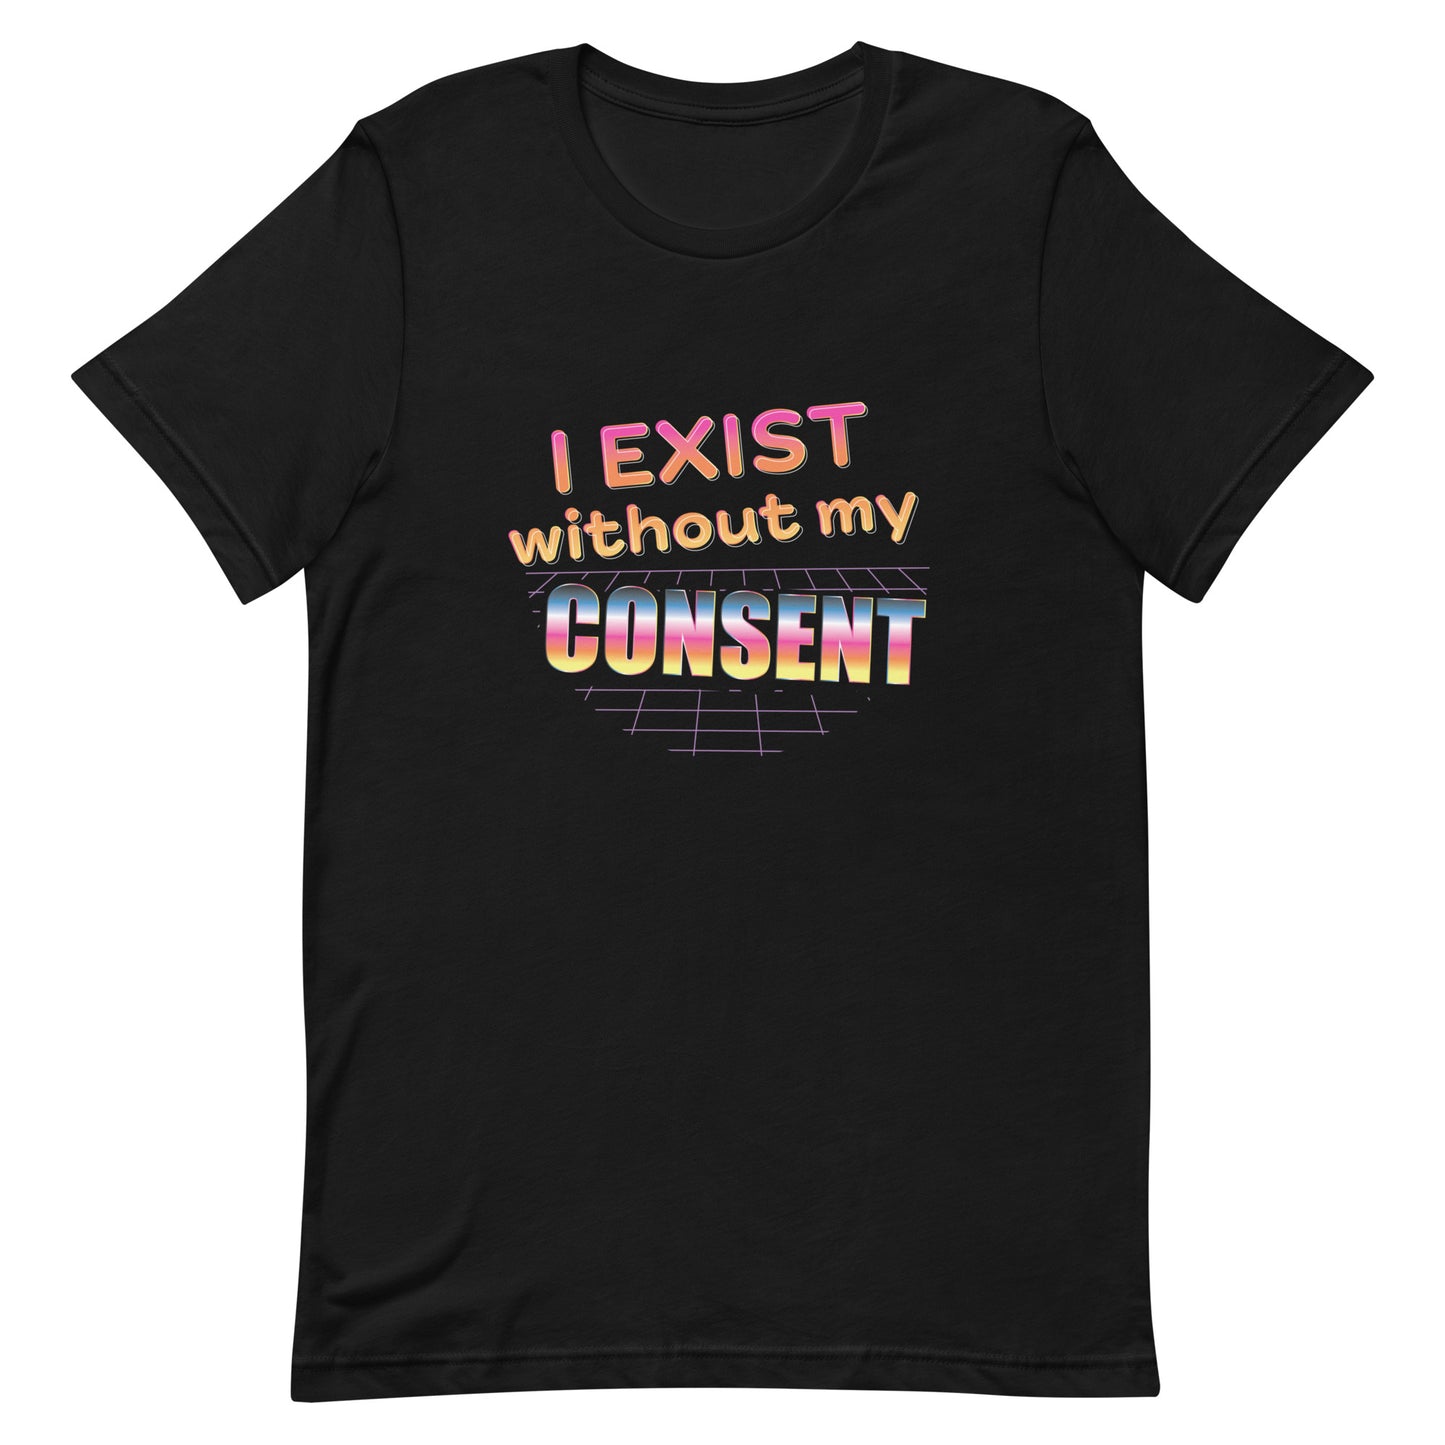 A black crewneck t-shirt featuring an 80's style graphic with brightly colored text that reads "I exist without my consent"